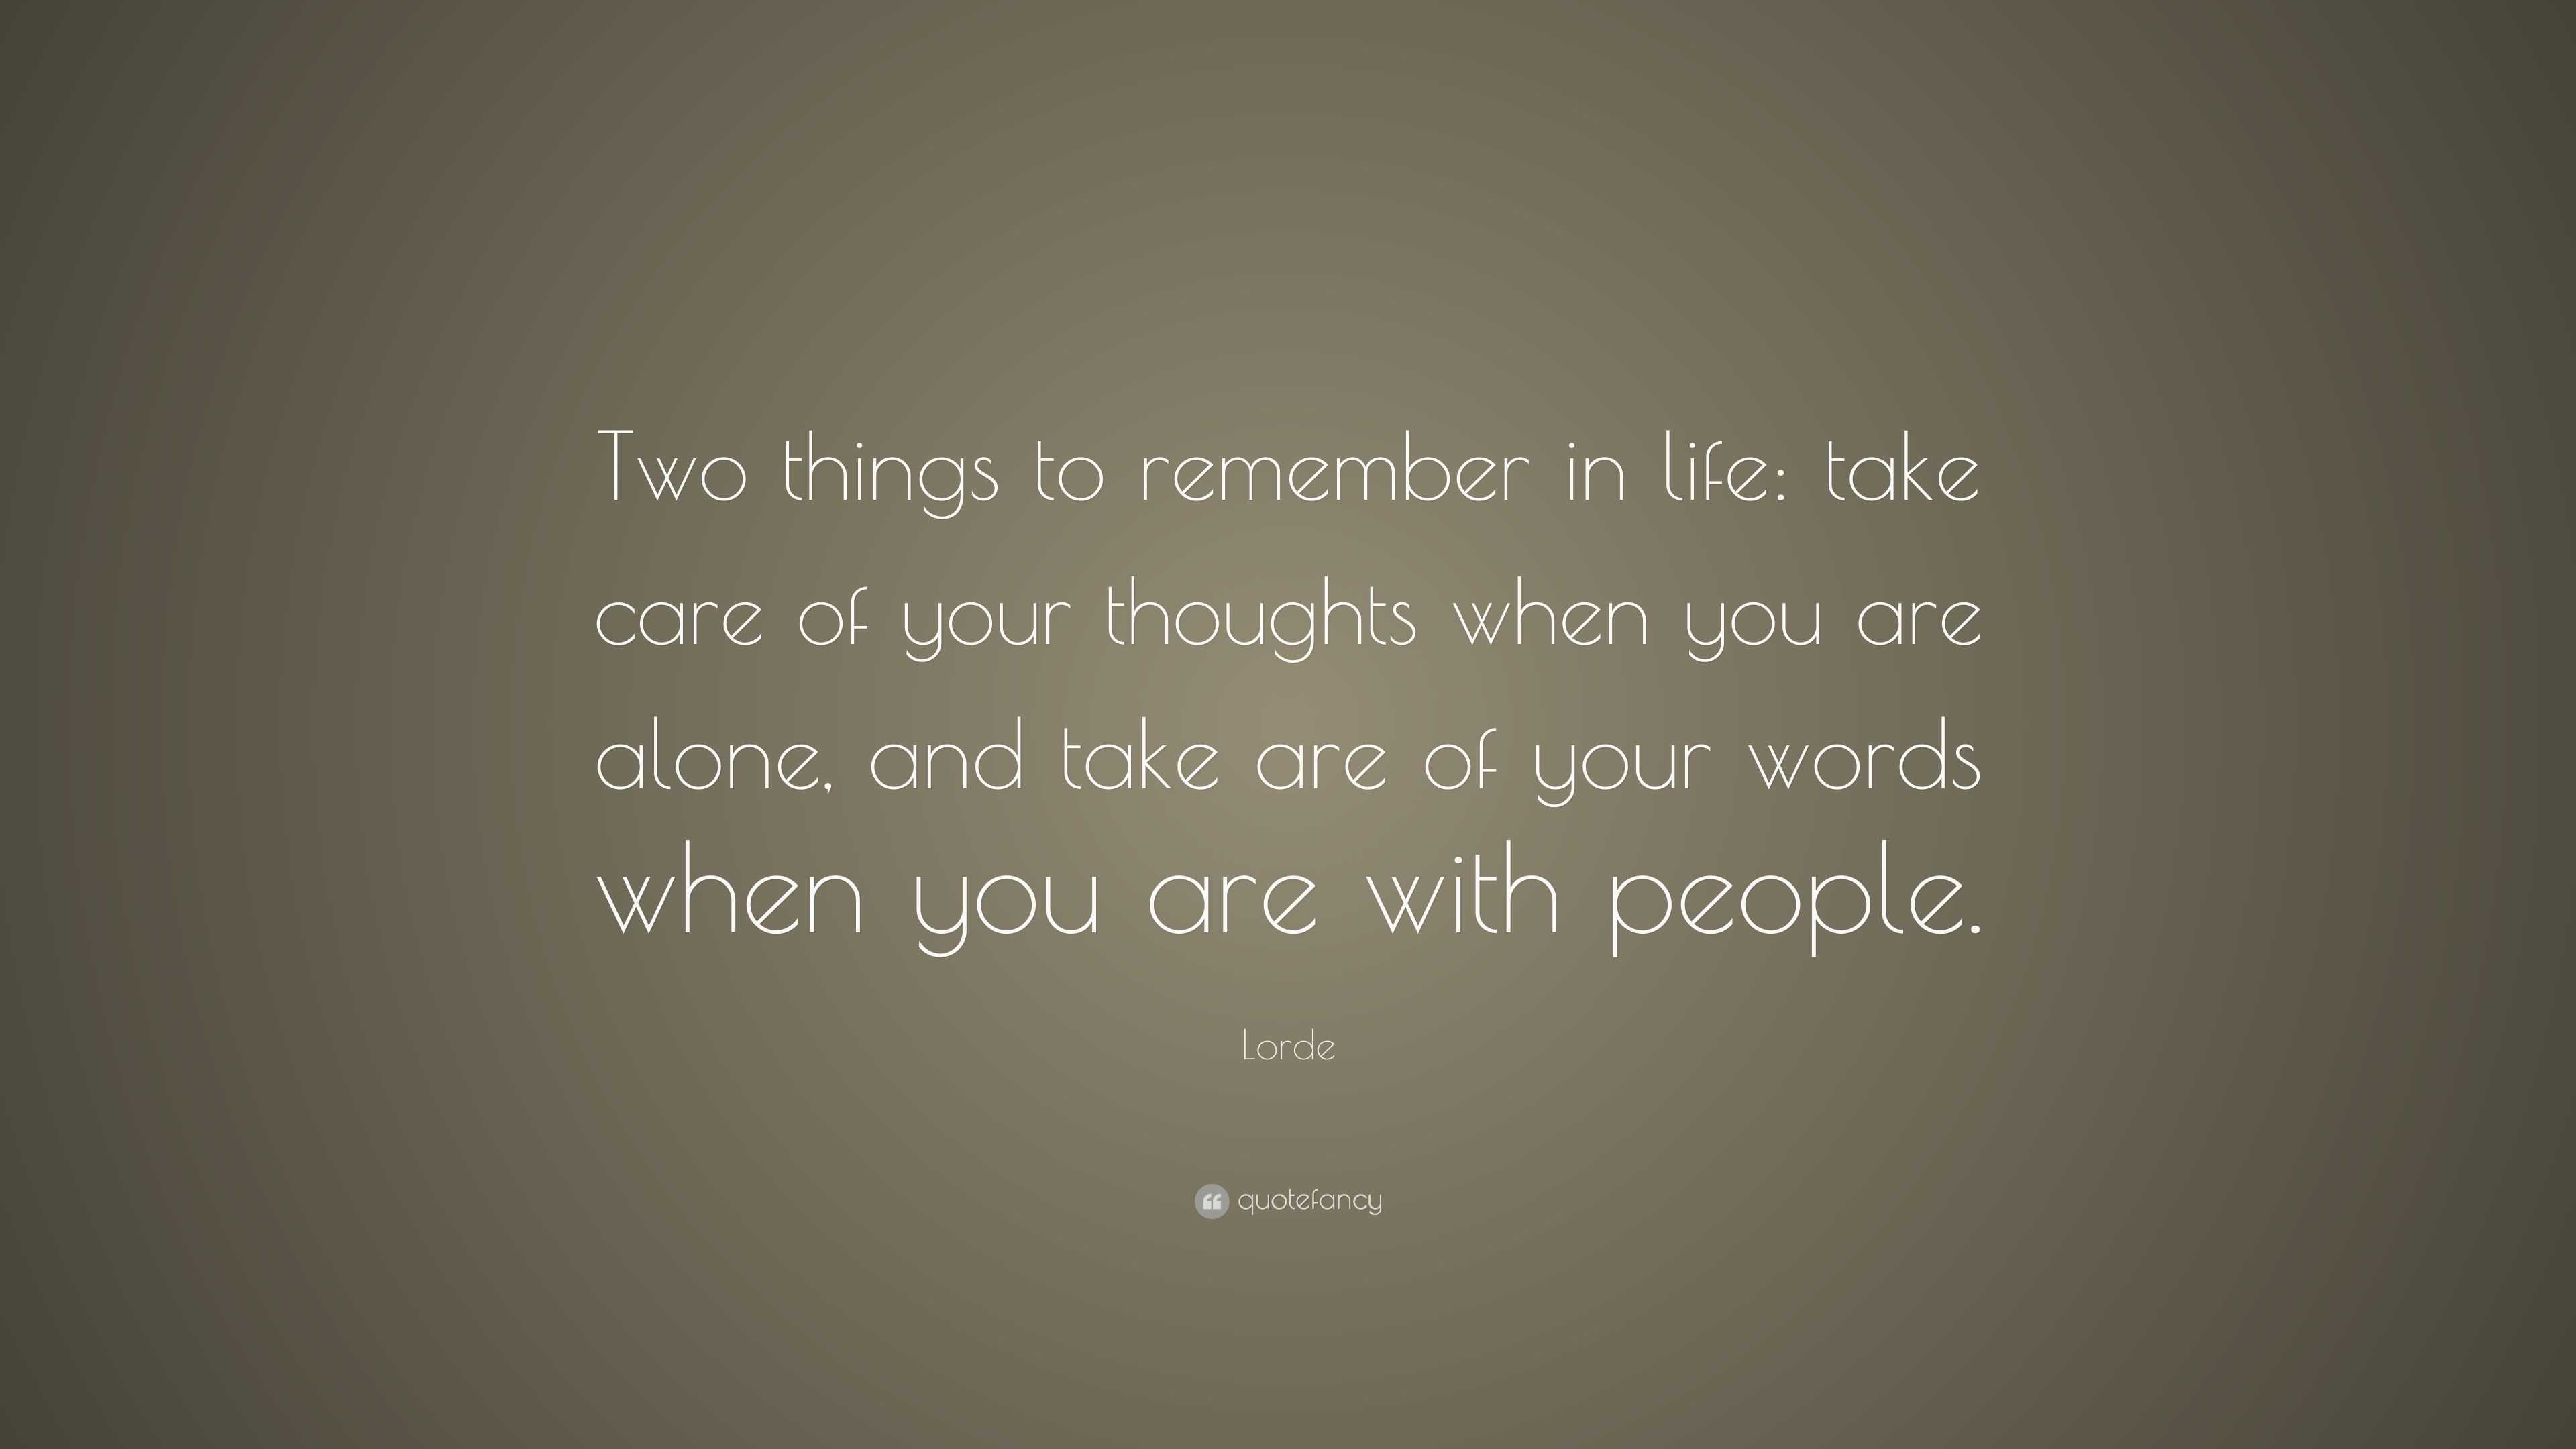 Lorde Quote: “Two things to remember in life: take care of your ...